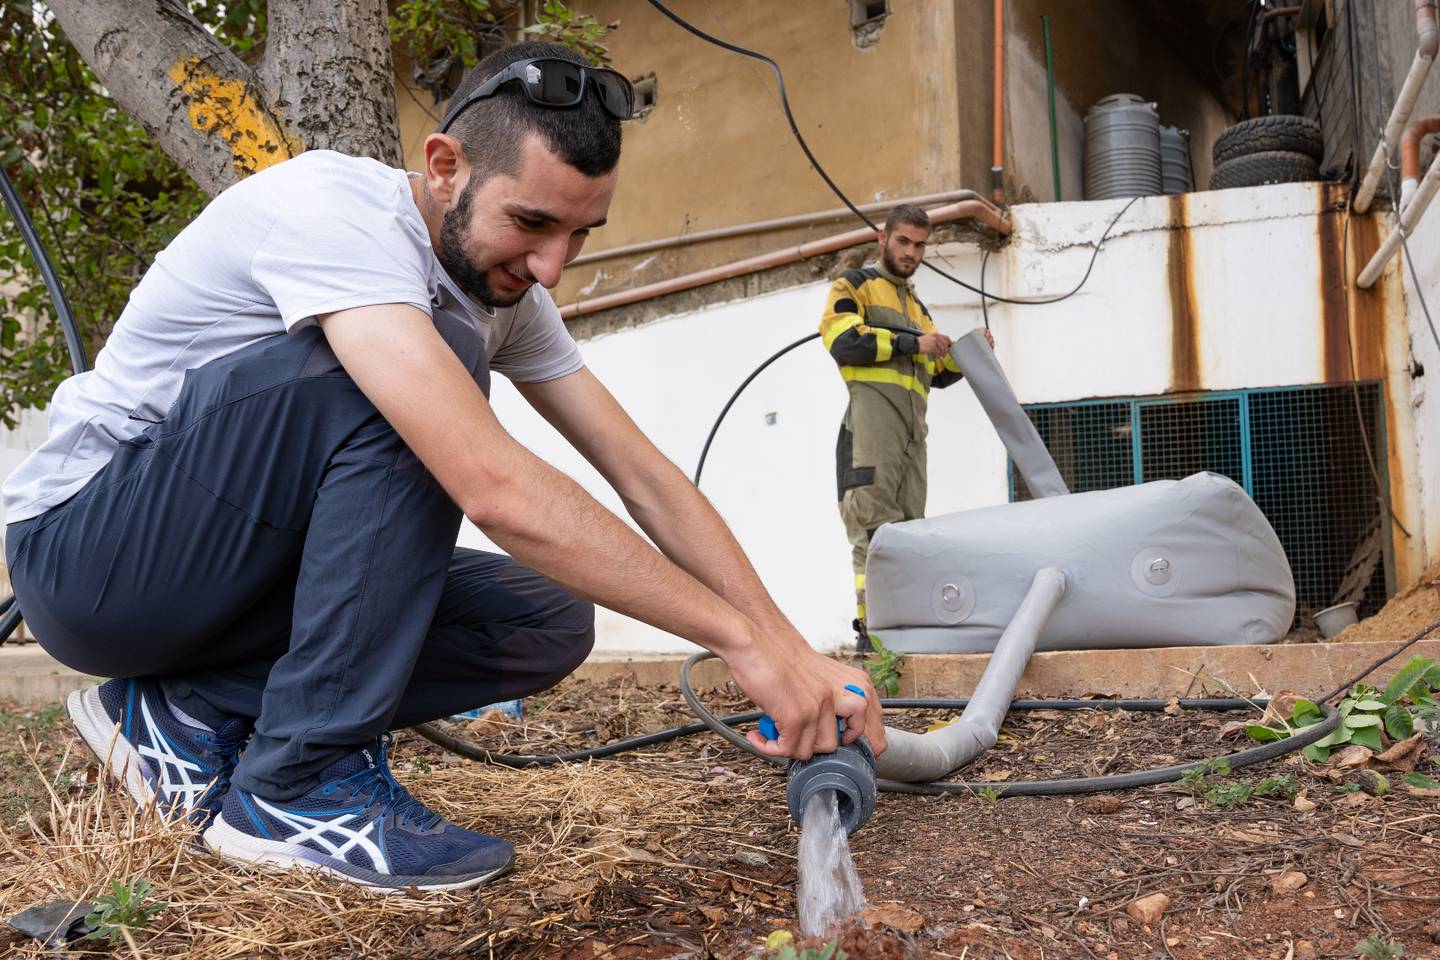 Volunteers in northern Lebanon prepare to fight wildfires